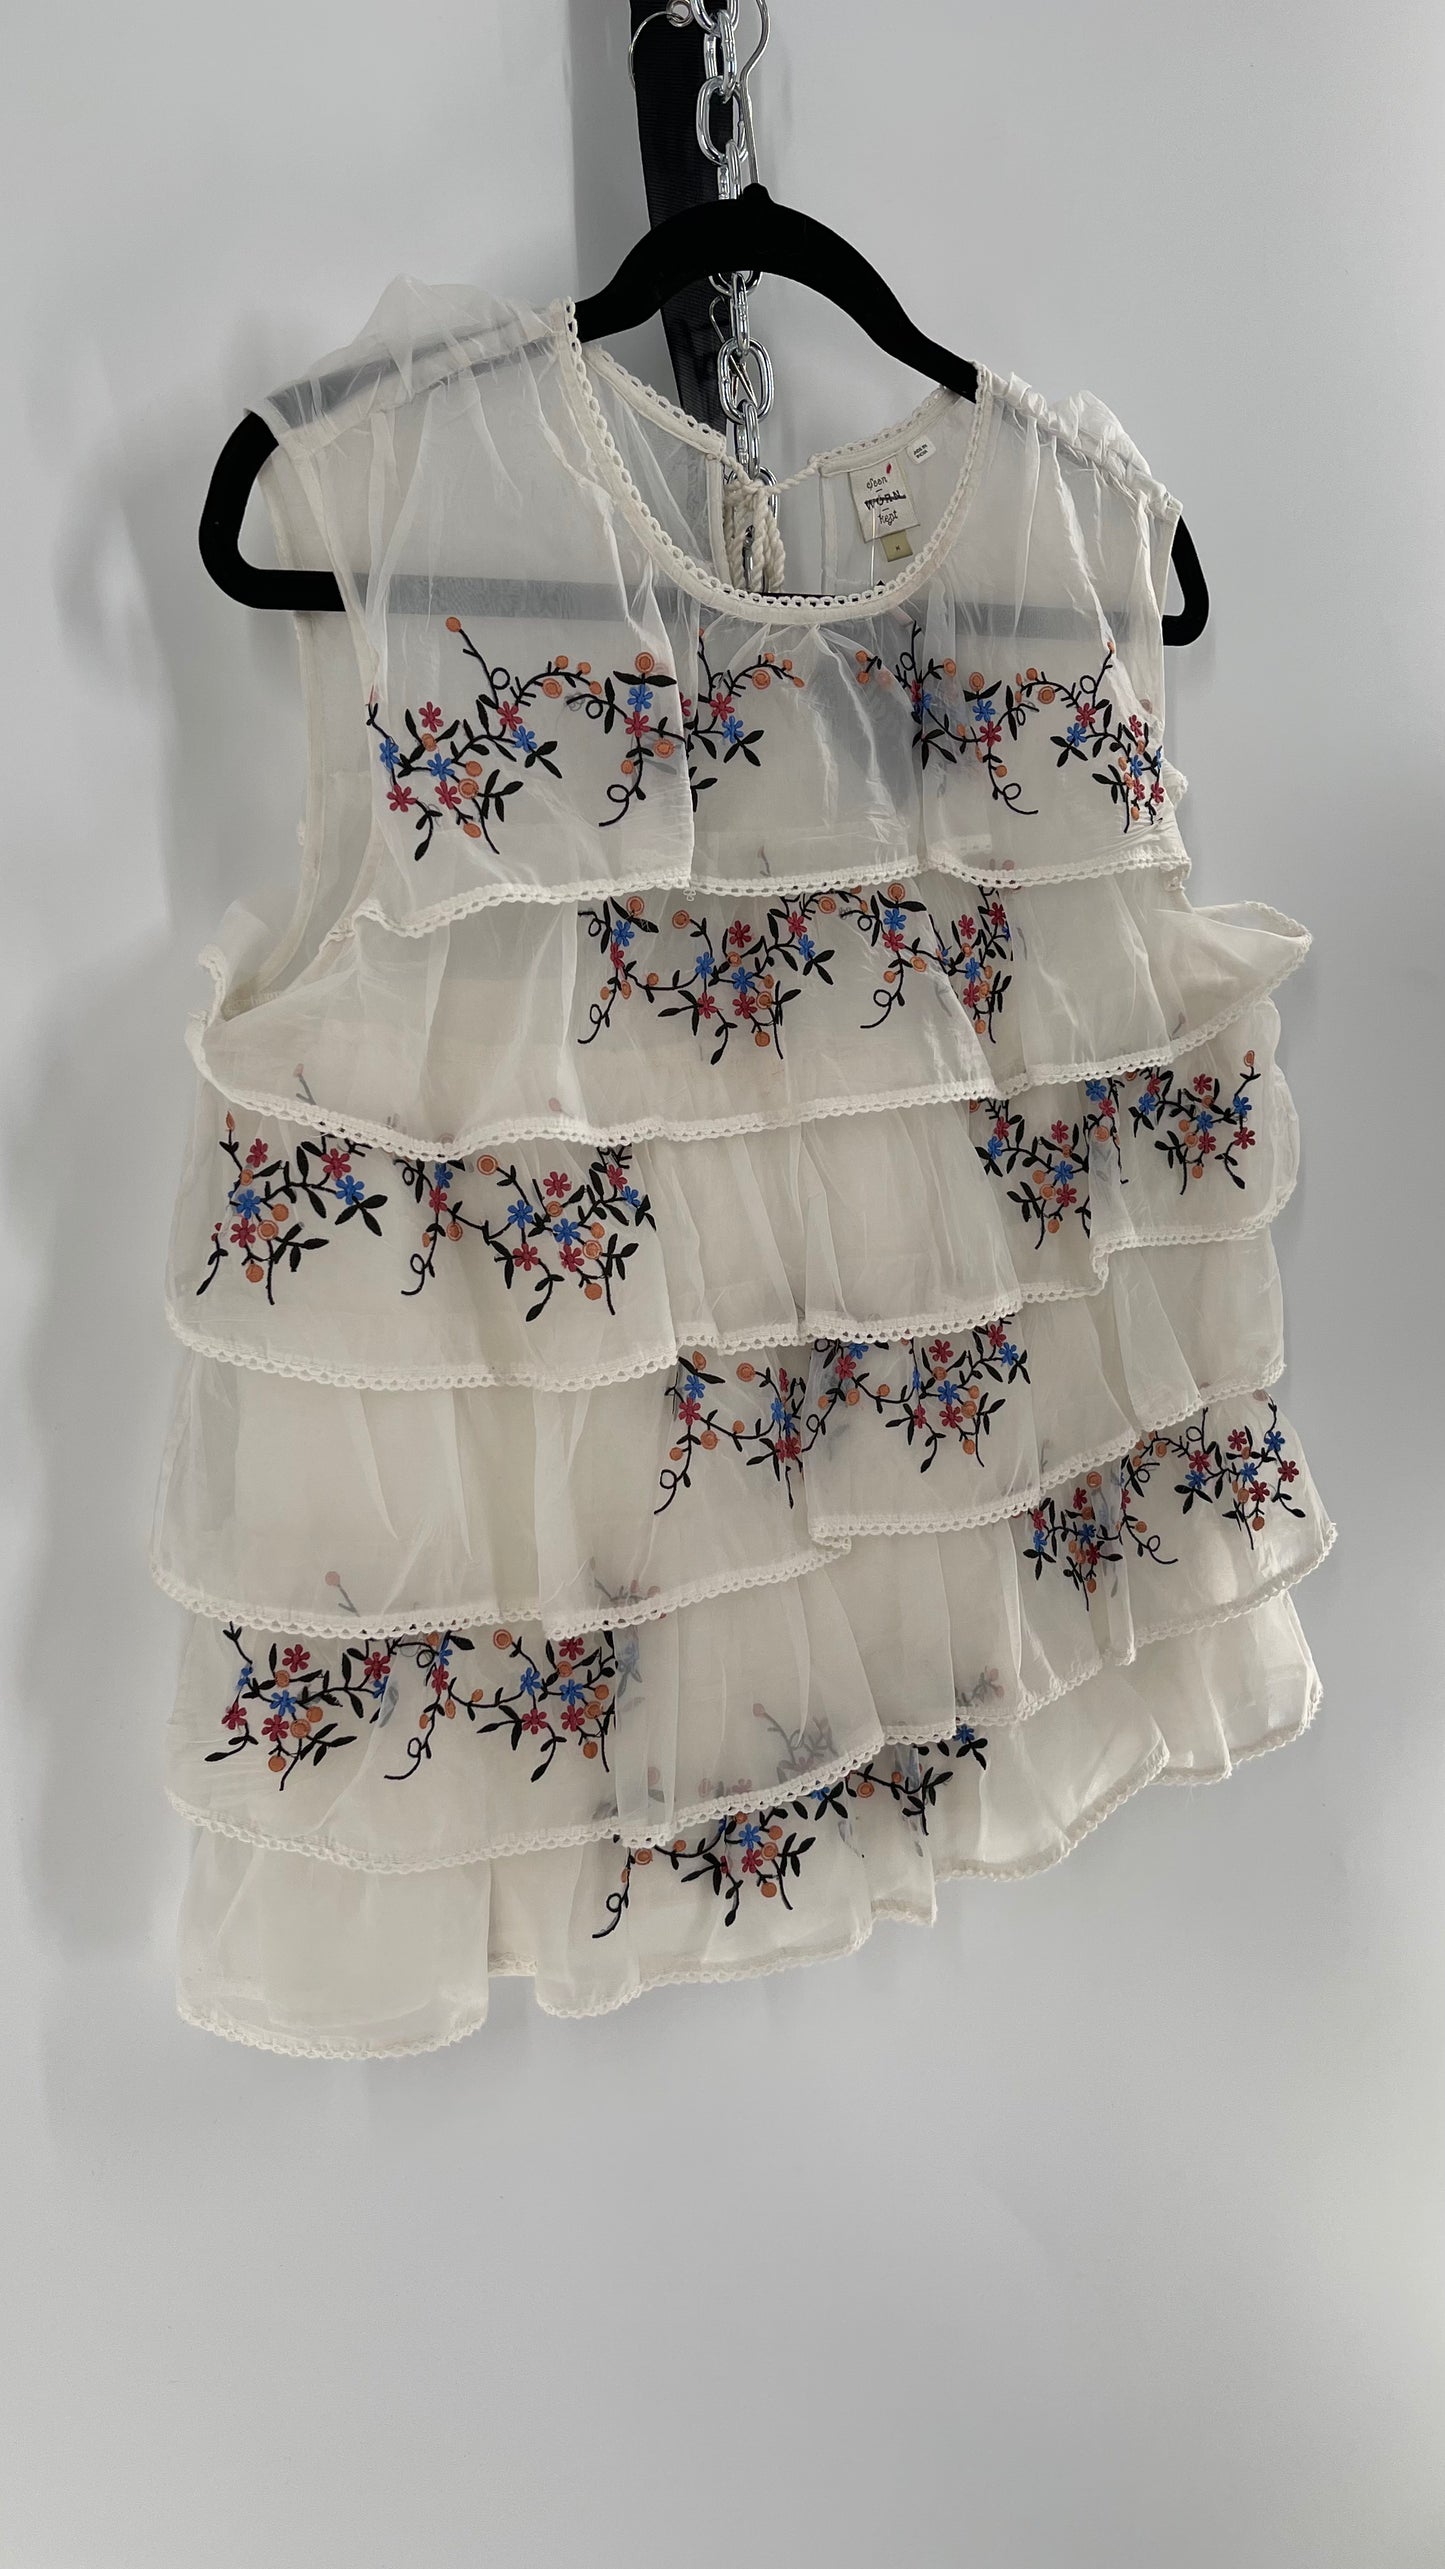 Anthropologie Seen. Worn. Kept Voile, Ruffled and Embroidered Sleeveless (Medium)